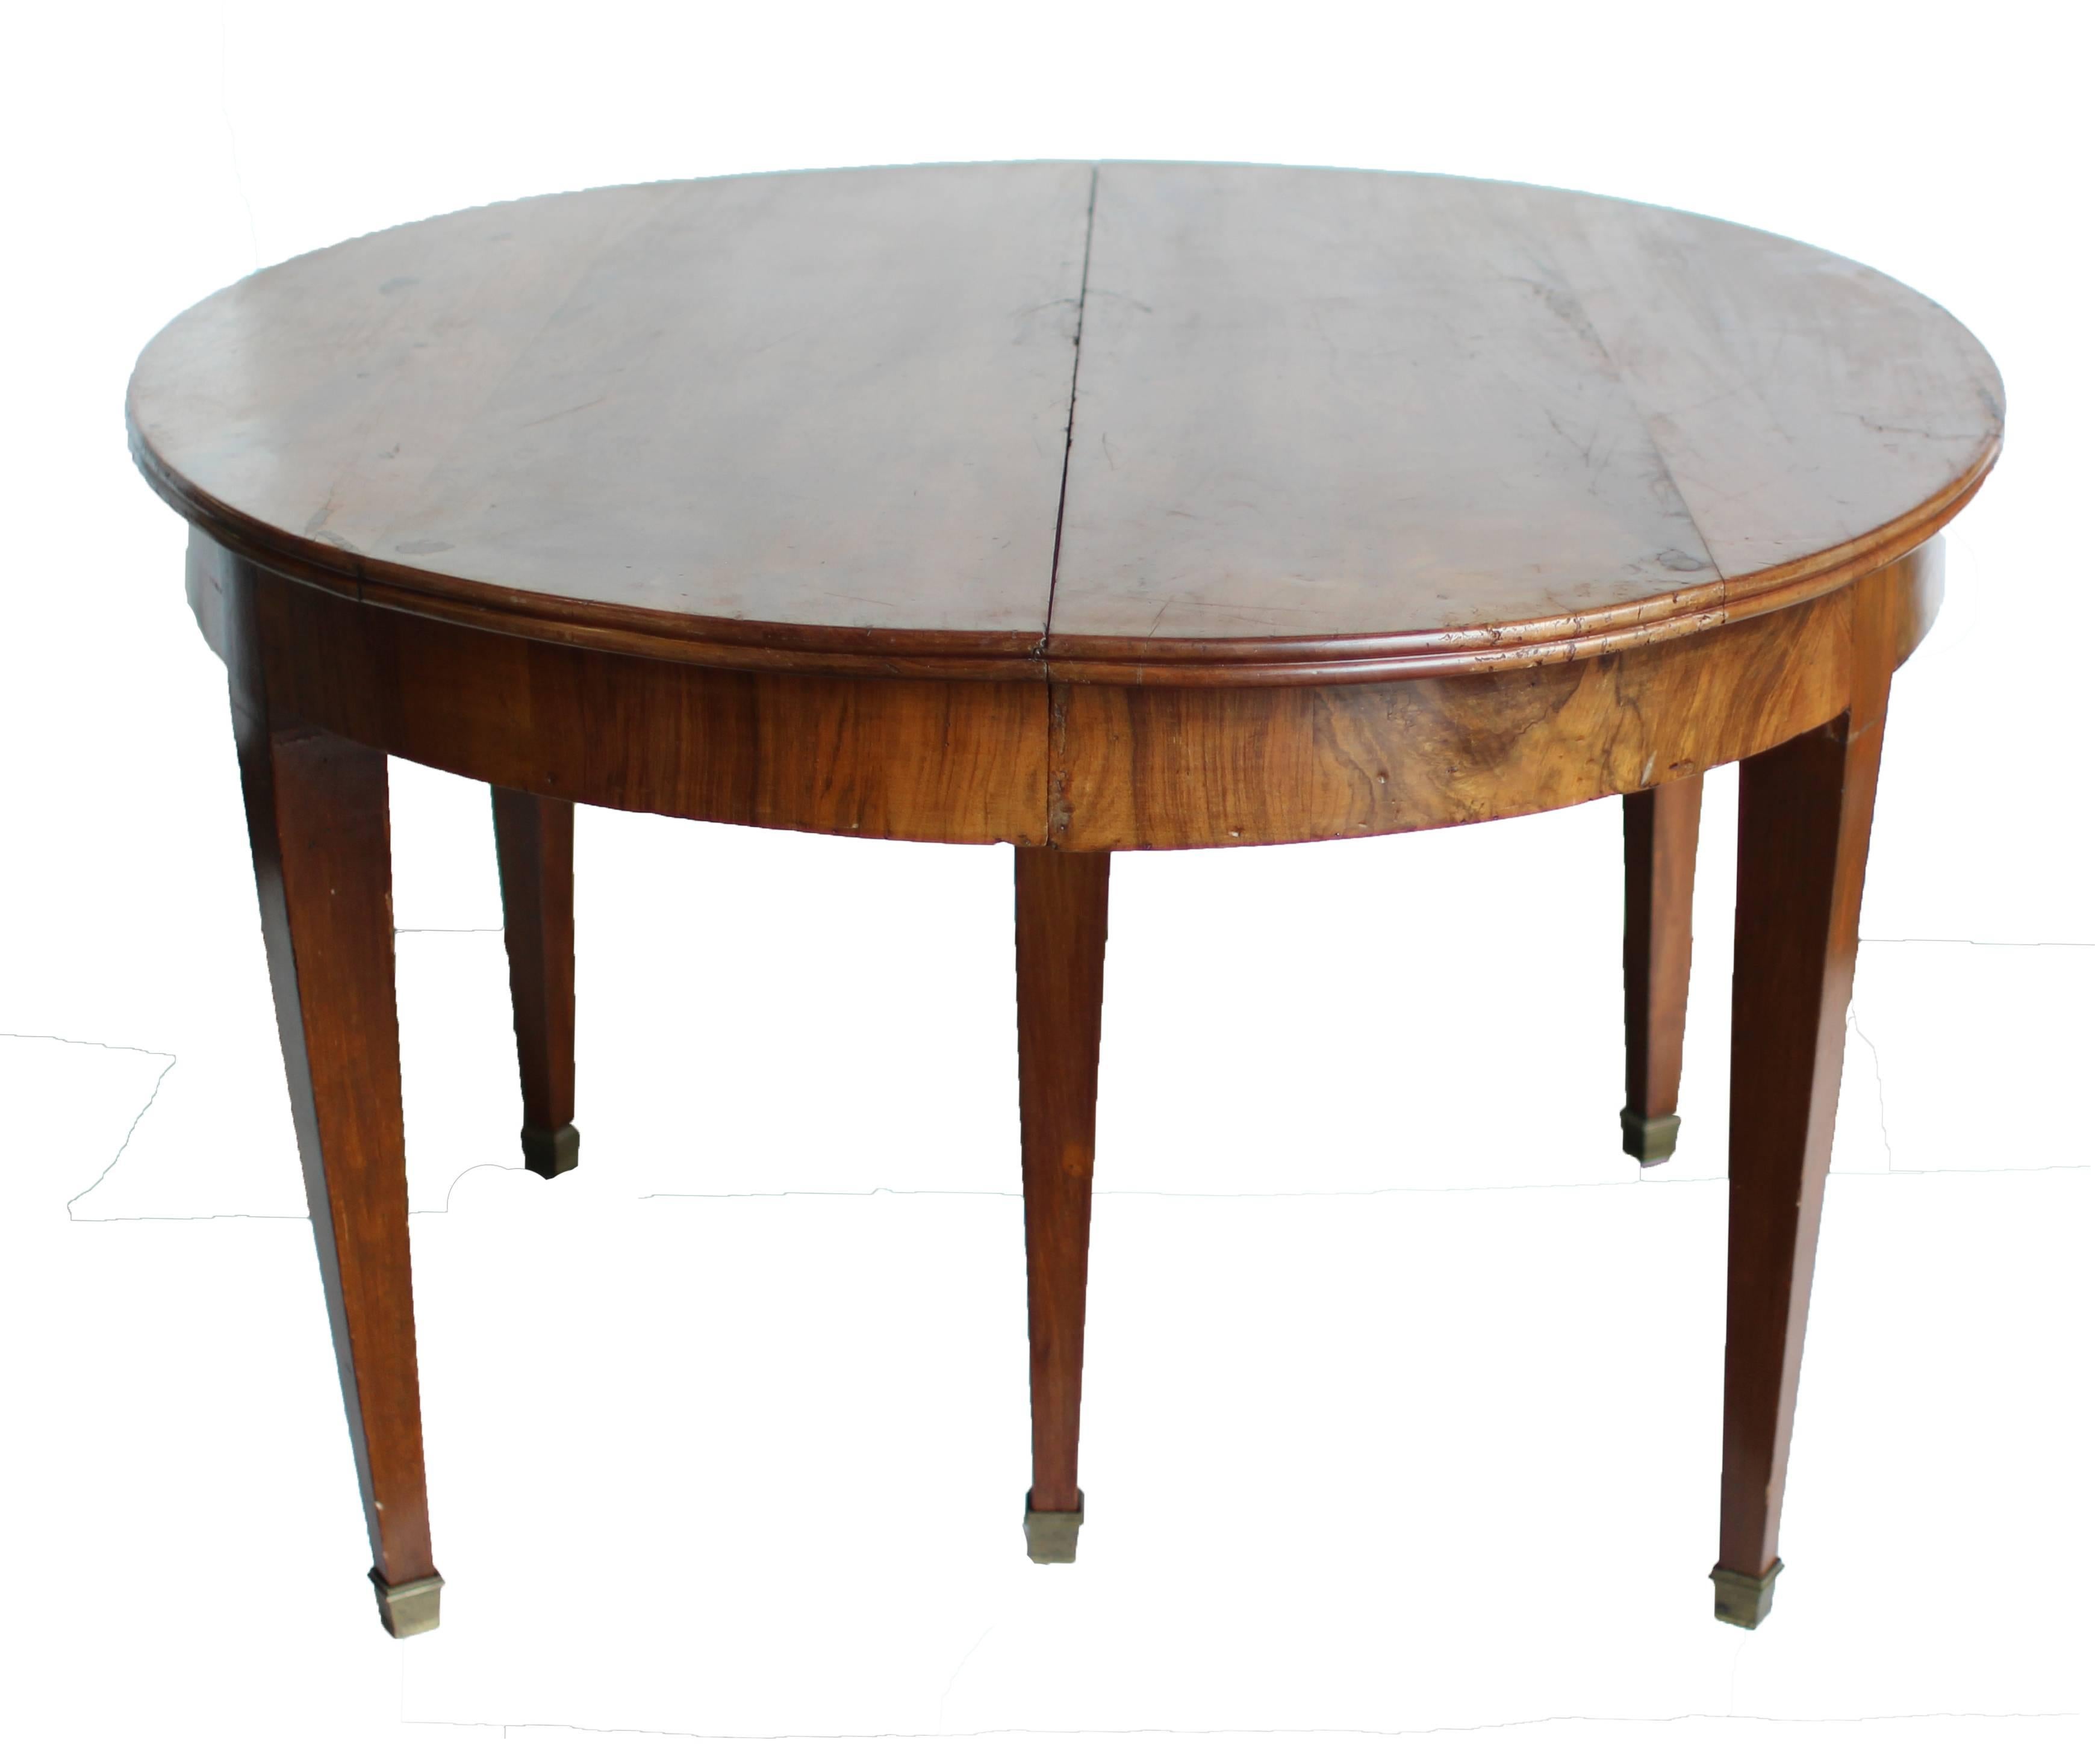 19c Directoire Walnut Dining Table w/ Three Leaves 1